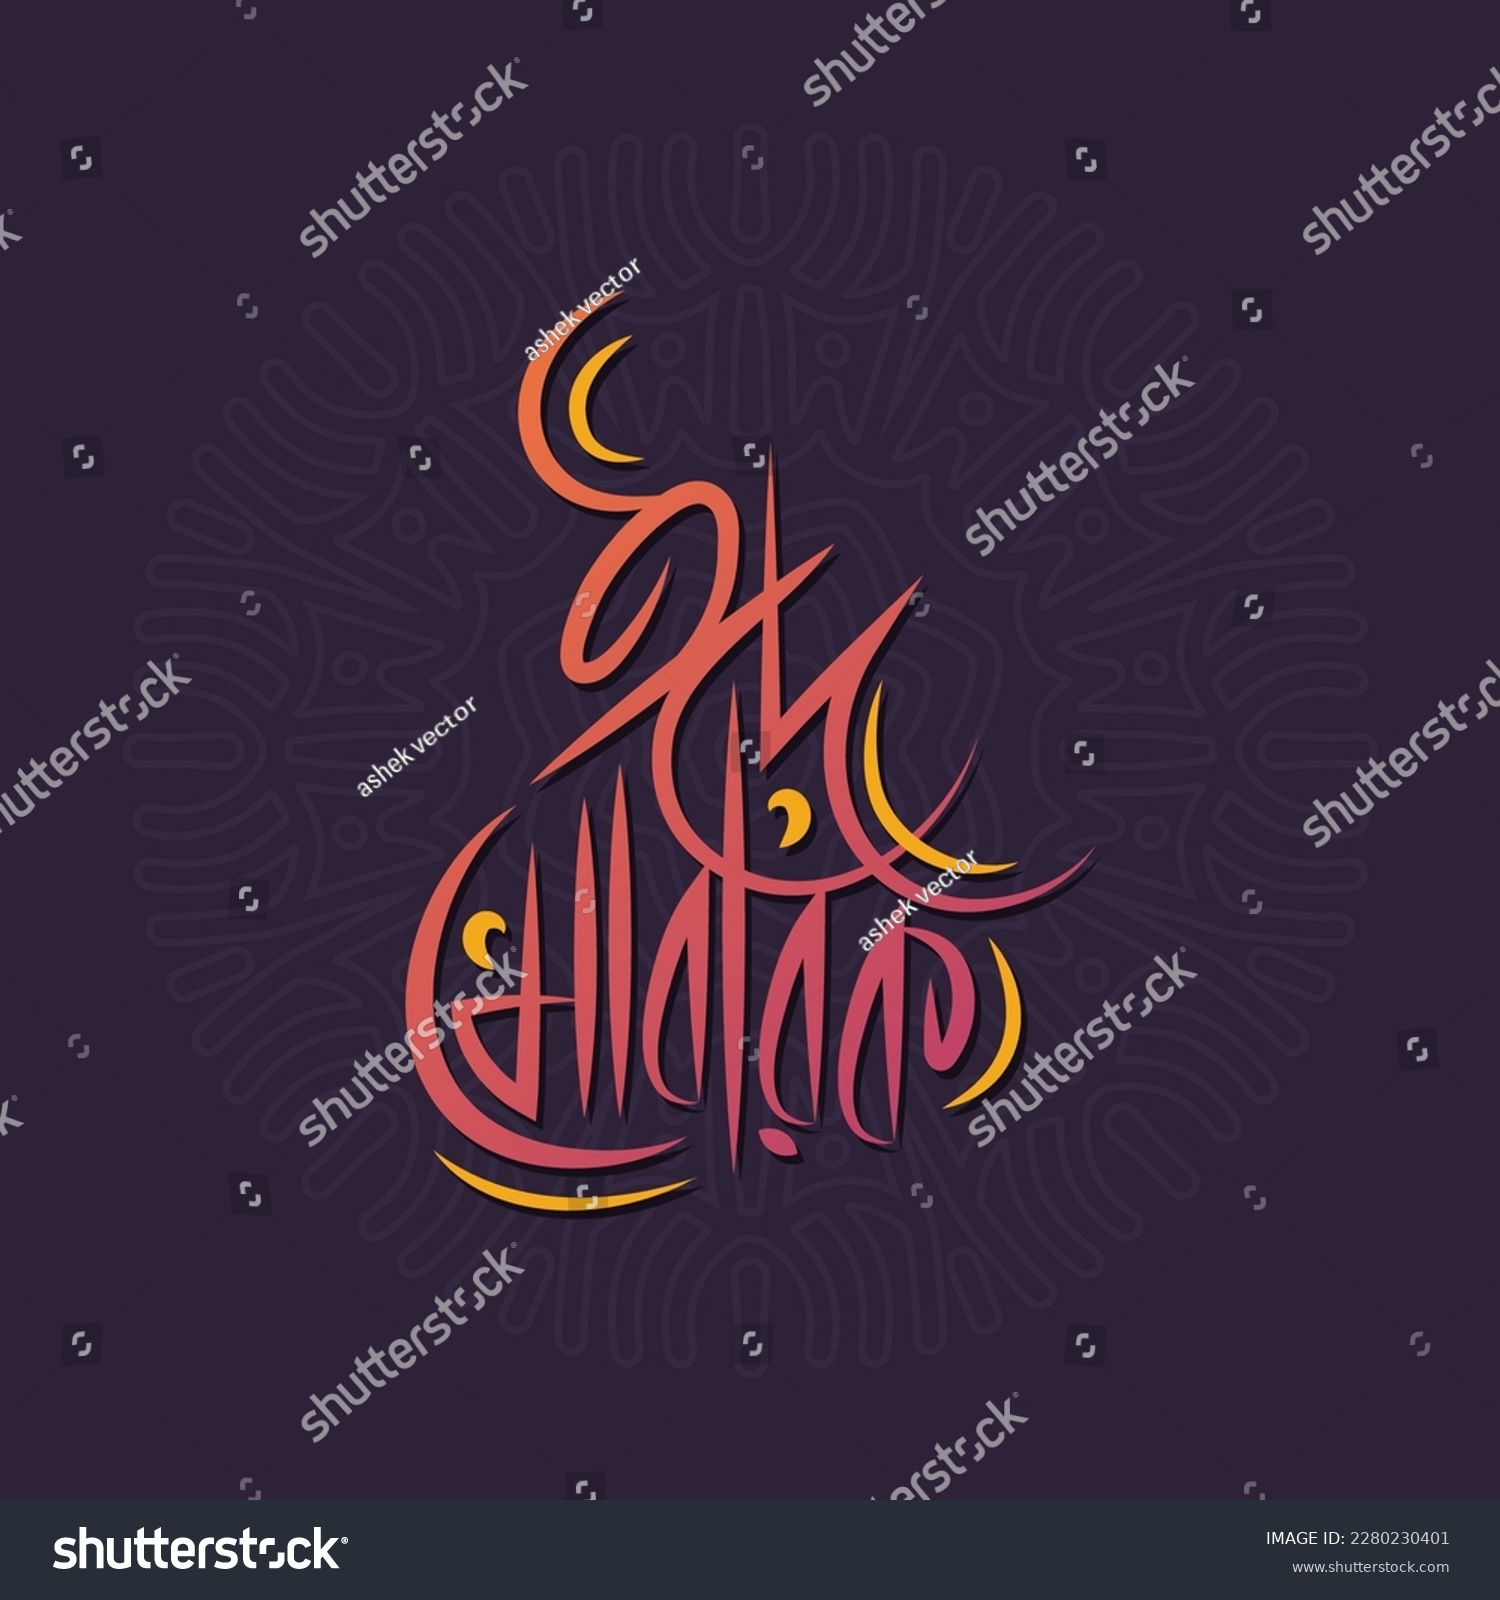 SVG of Arabic style eid Mubarak bangla typography and calligraphy design. Religious holidays celebrated by Muslims worldwide.
Bengali typography vector illustration, poster, banner, template. svg